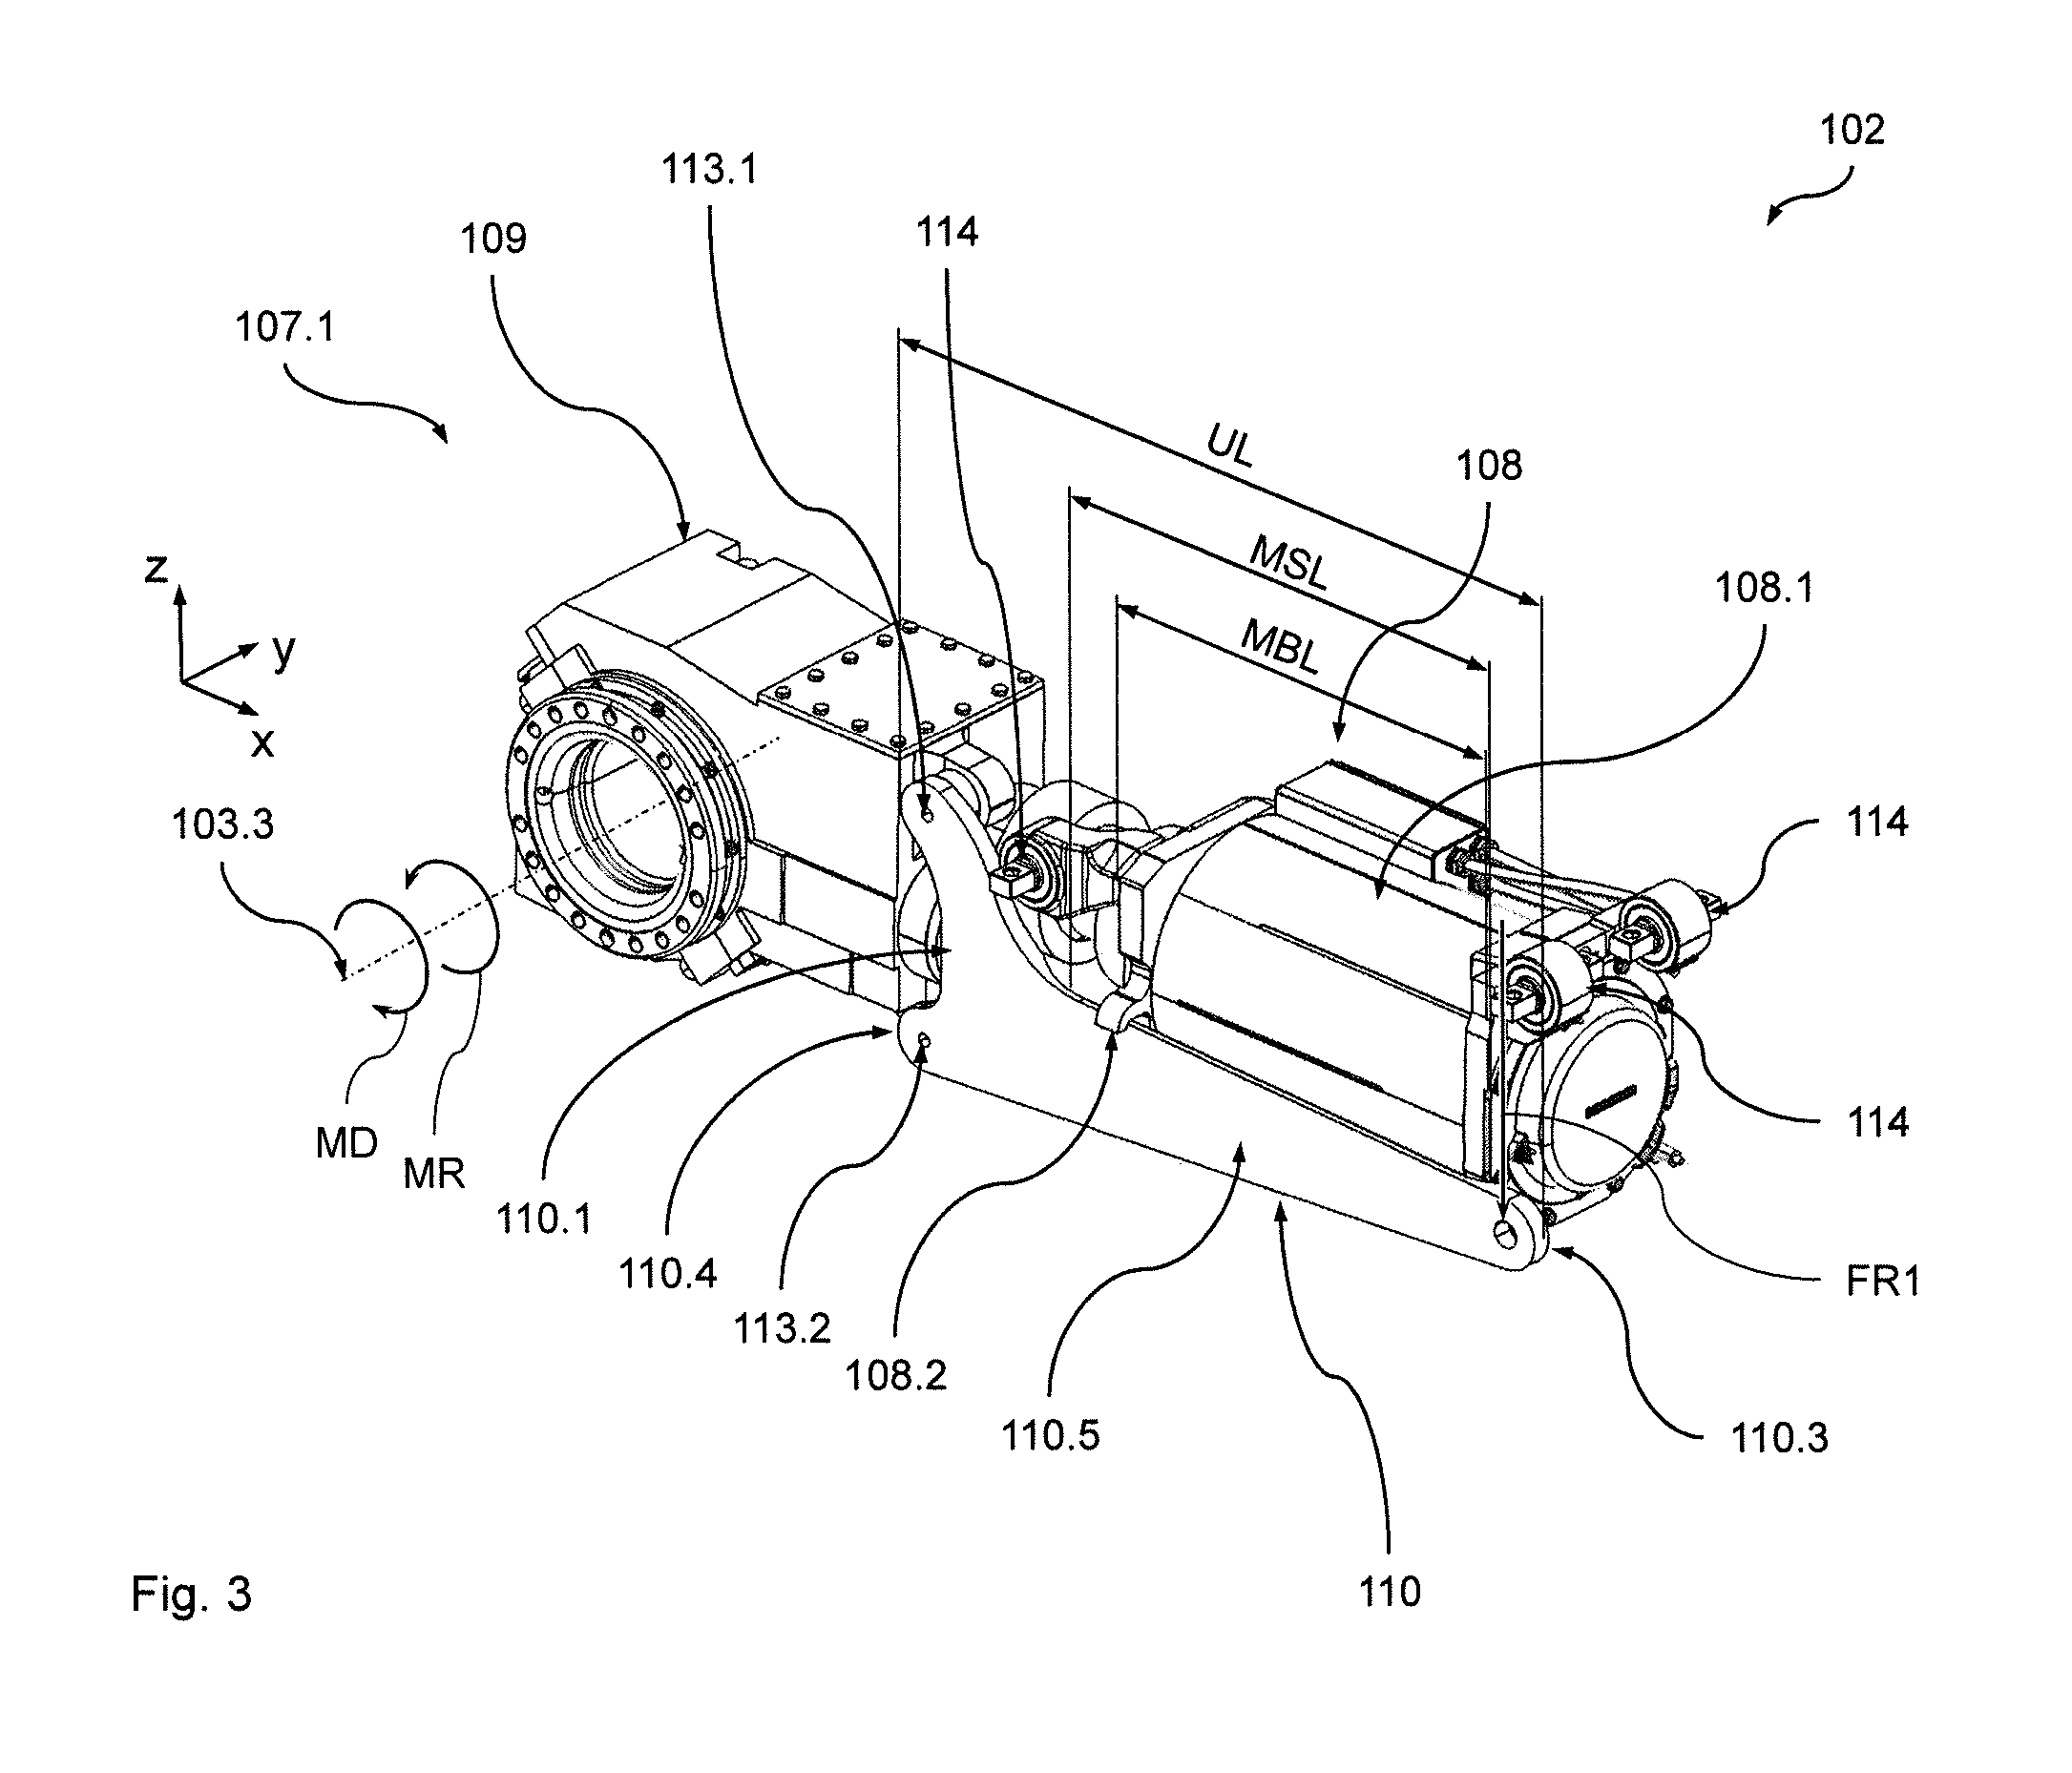 Running gear for a rail vehicle